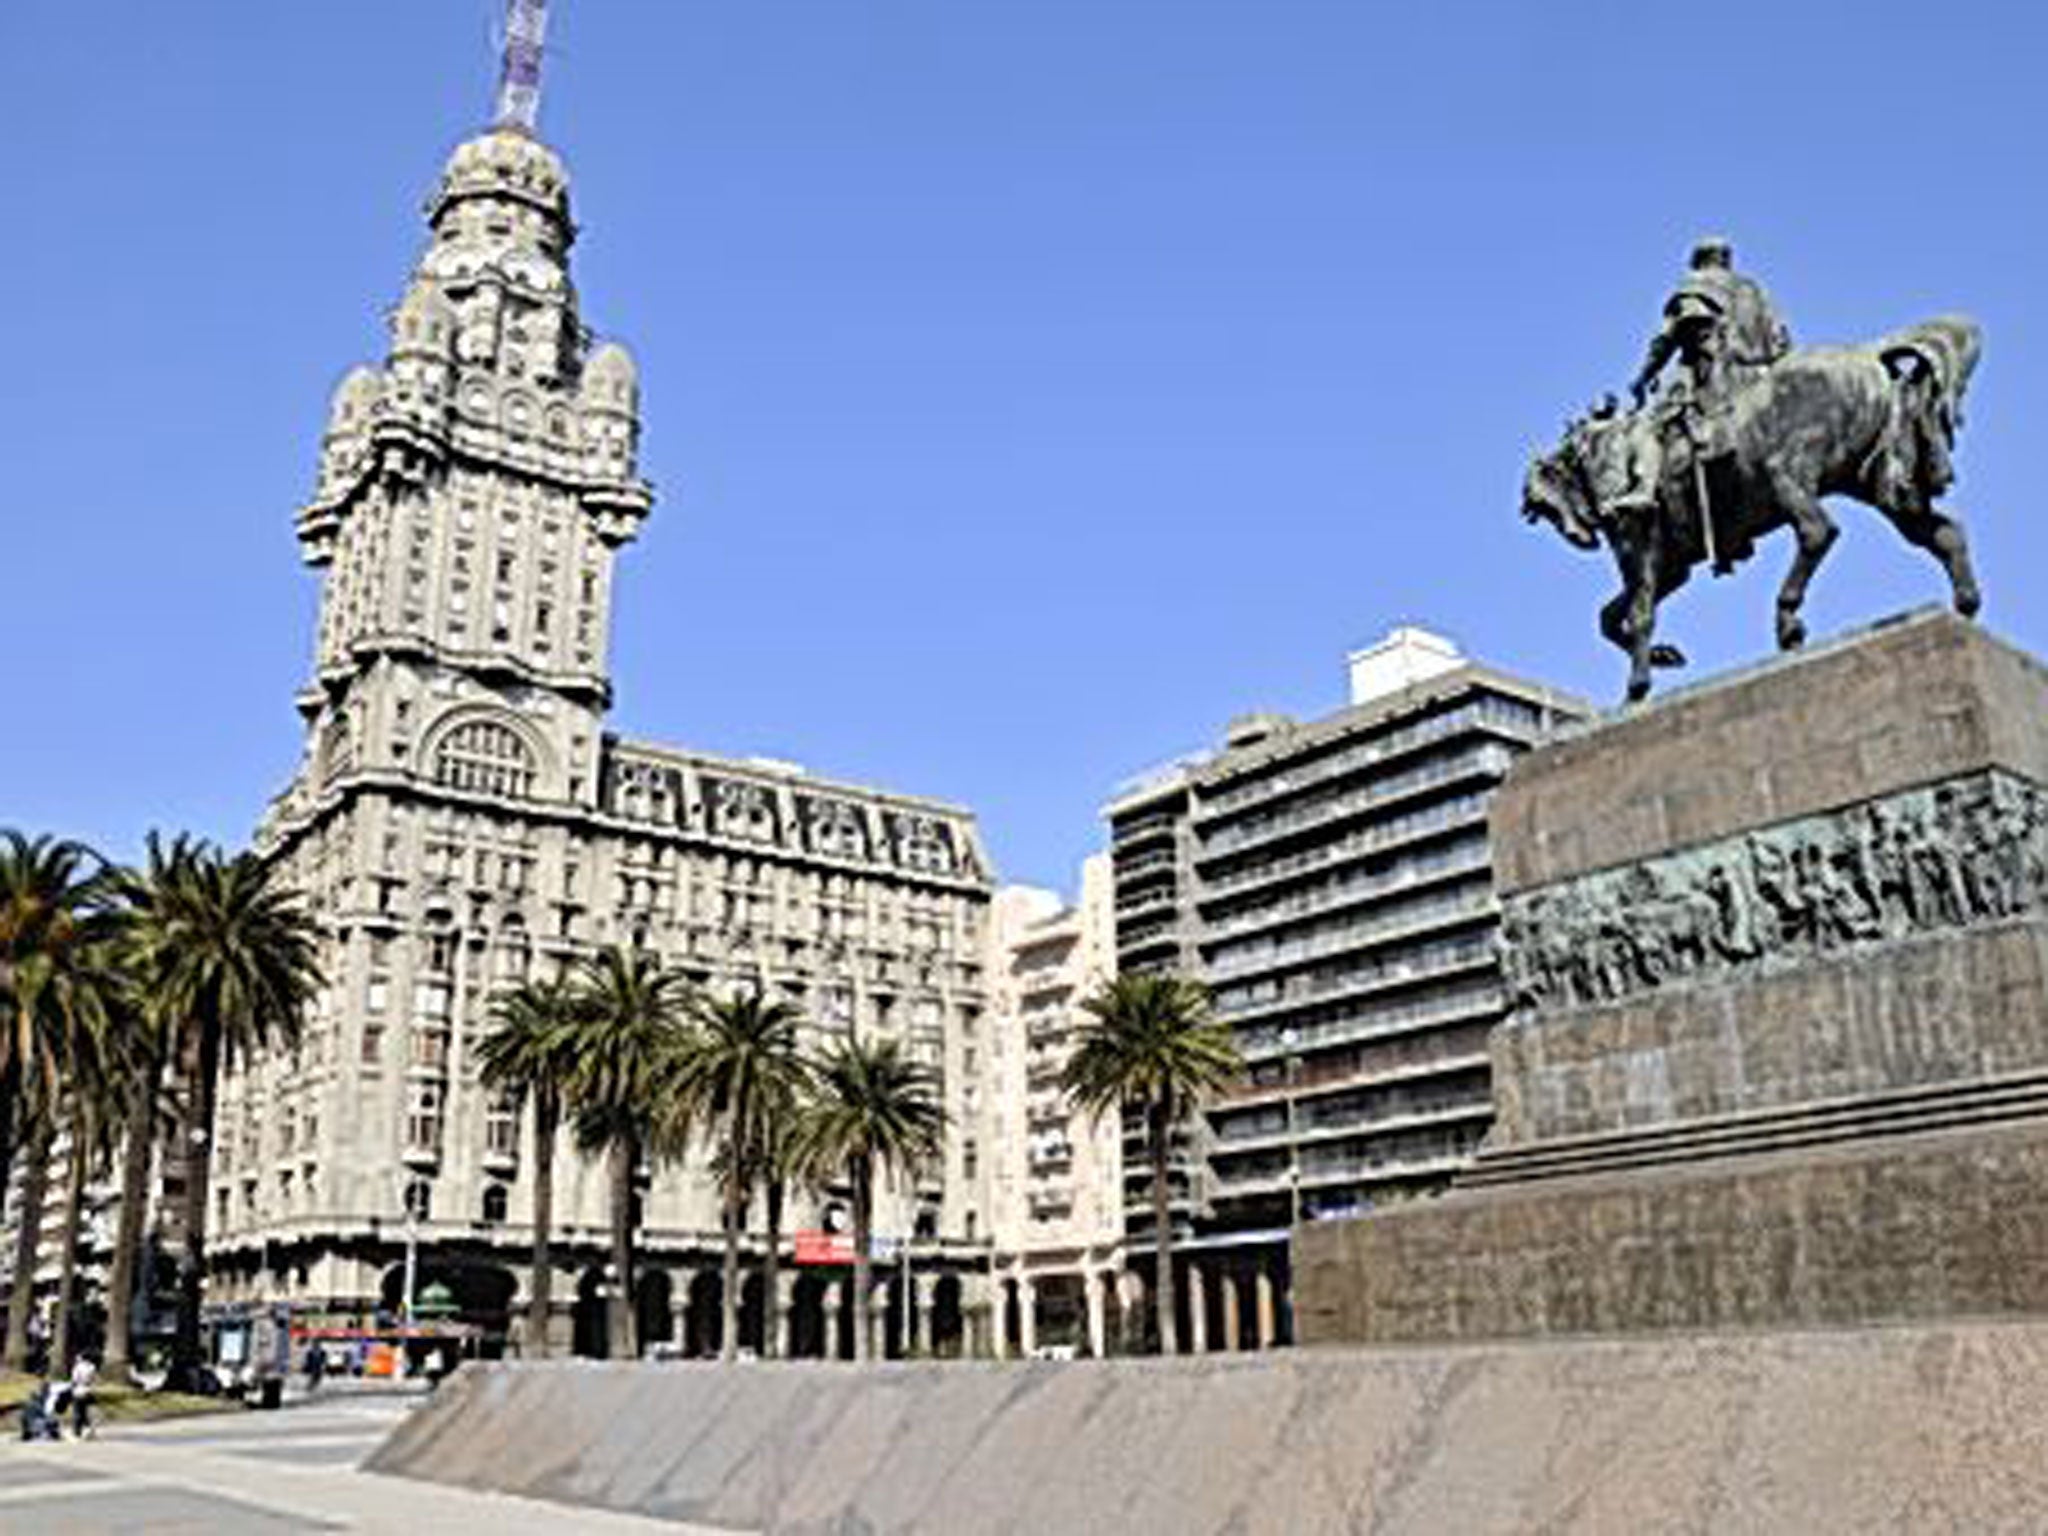 Montevideo: 'Run down and lacks glamour'